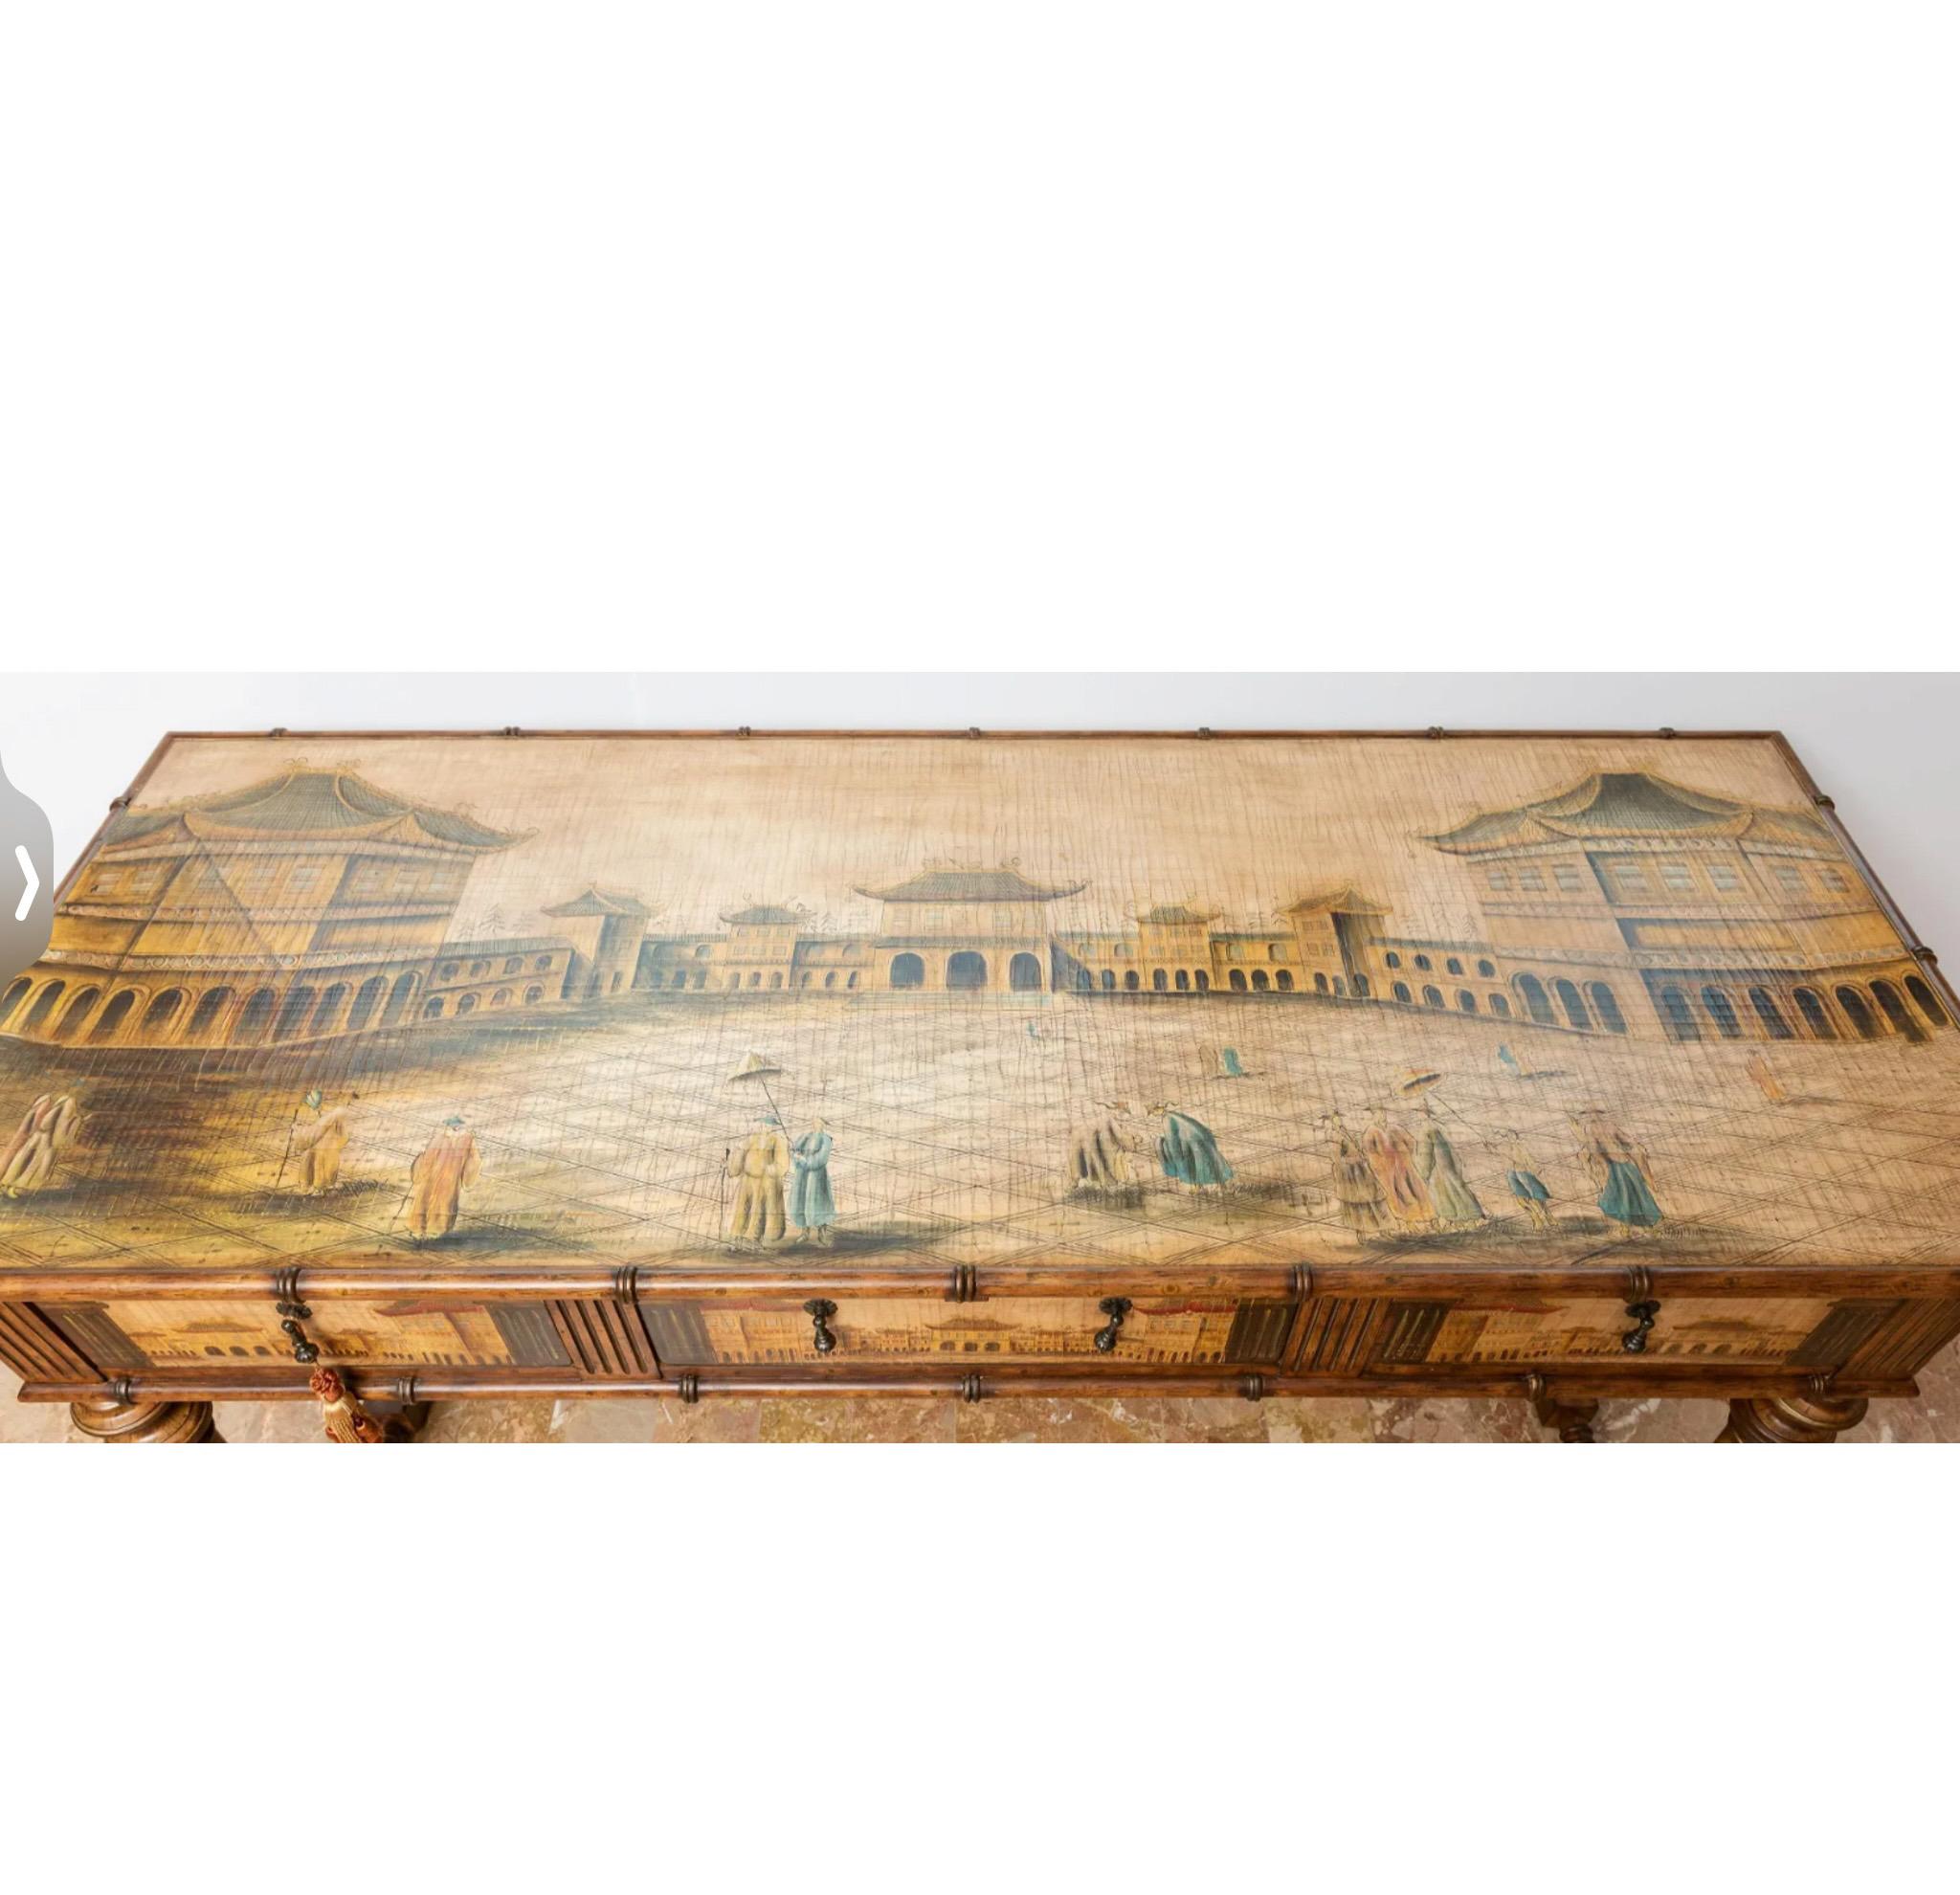 This is a French style fruitwood credenza or sideboard with a lovely chinoiserie pastoral scene painted throughout all surfaces. It has three felt lined drawer. The feet are optional, and the images include with and without them. The frame appears